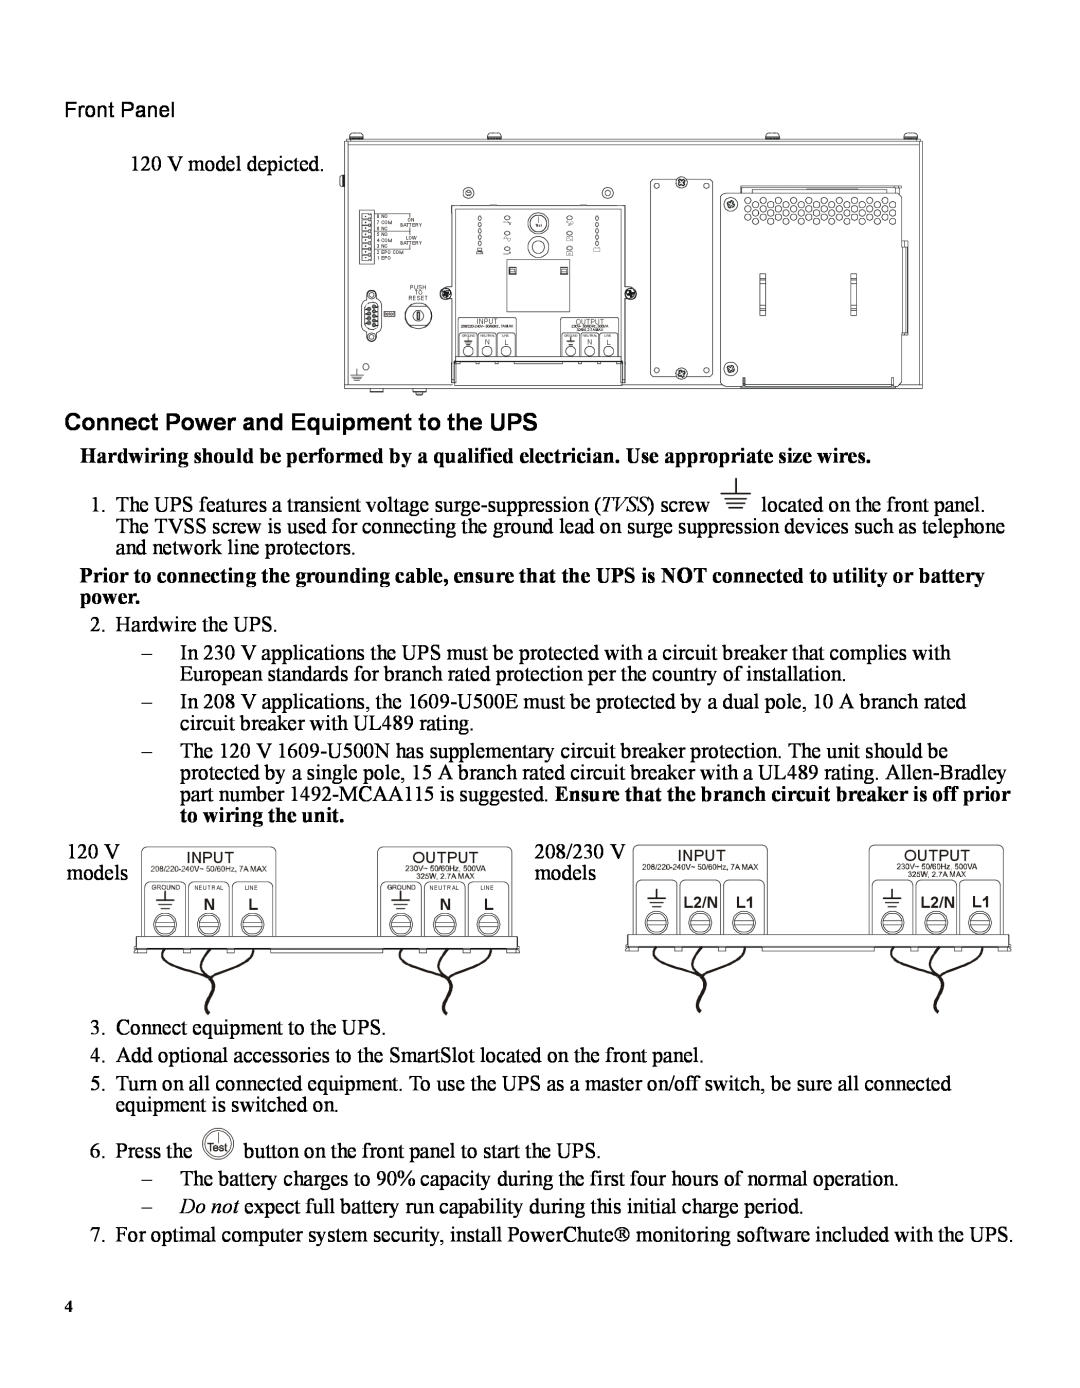 American Power Conversion 1609 user manual Connect Power and Equipment to the UPS, 208/230, models 